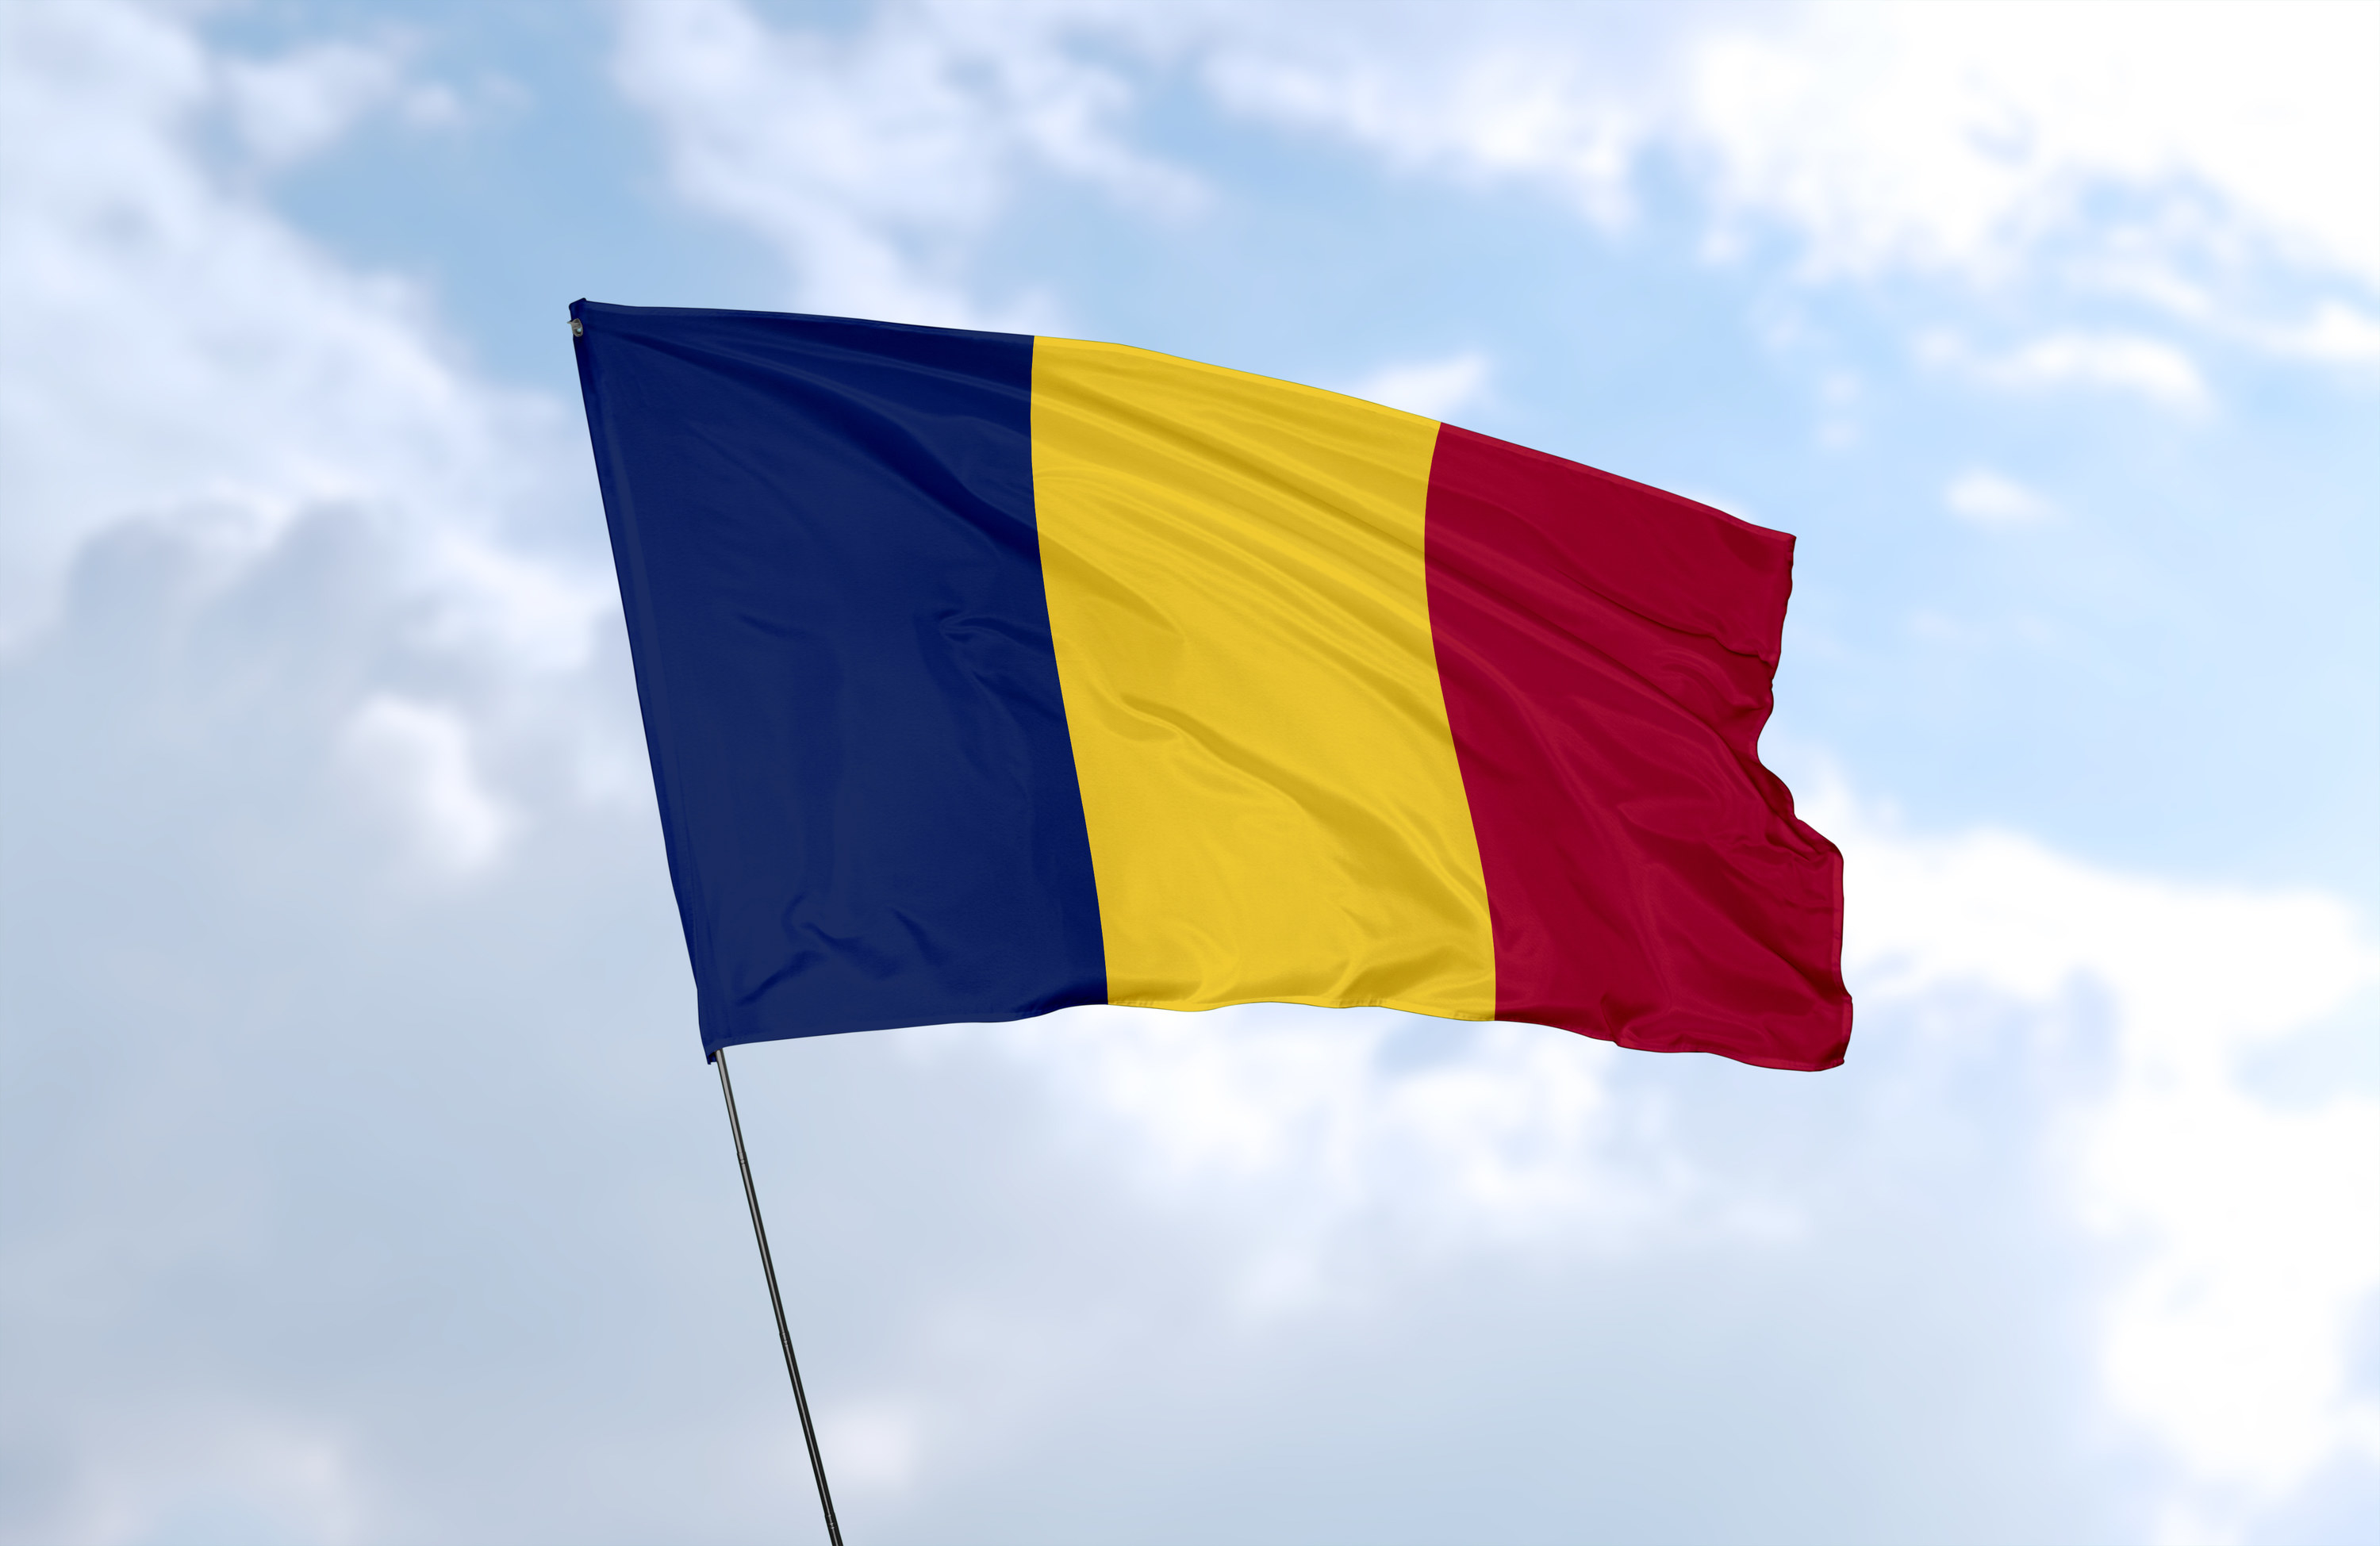 Flag of Chad, a vertical tricolor consisting of a blue, gold, and red field